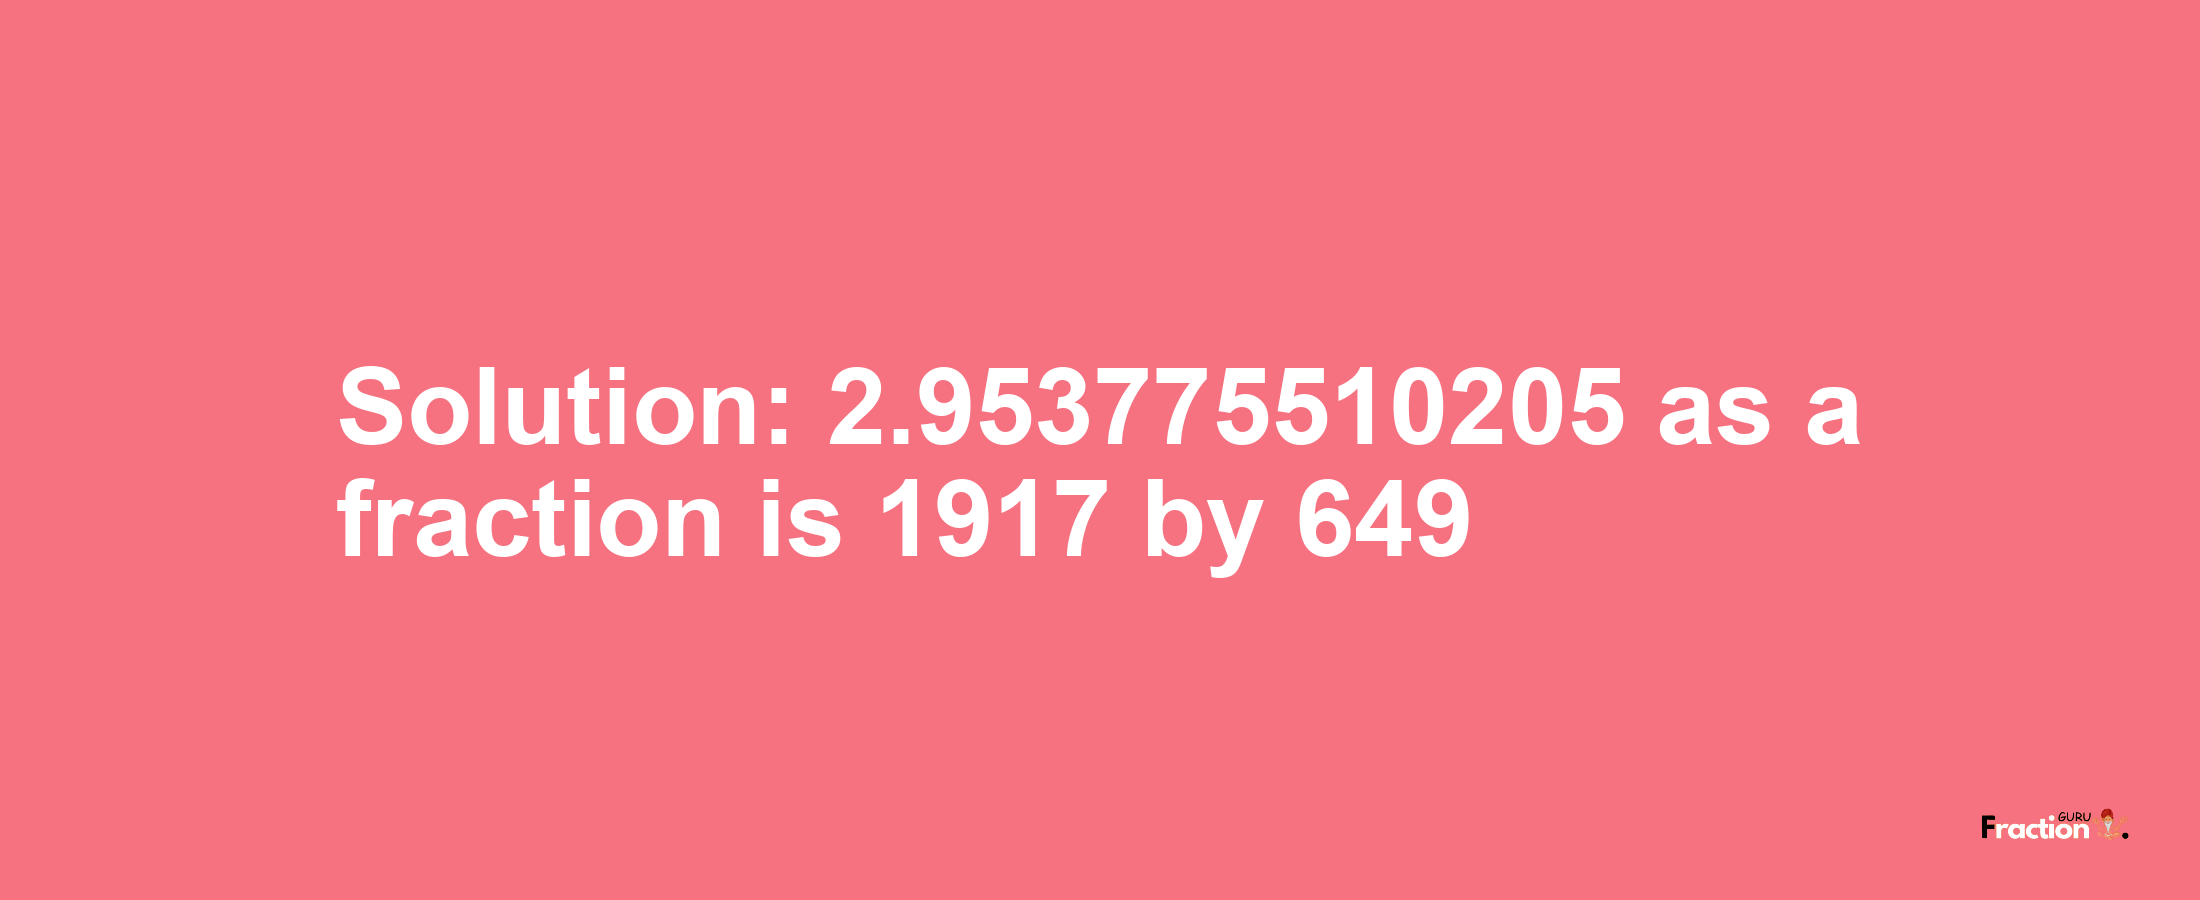 Solution:2.953775510205 as a fraction is 1917/649